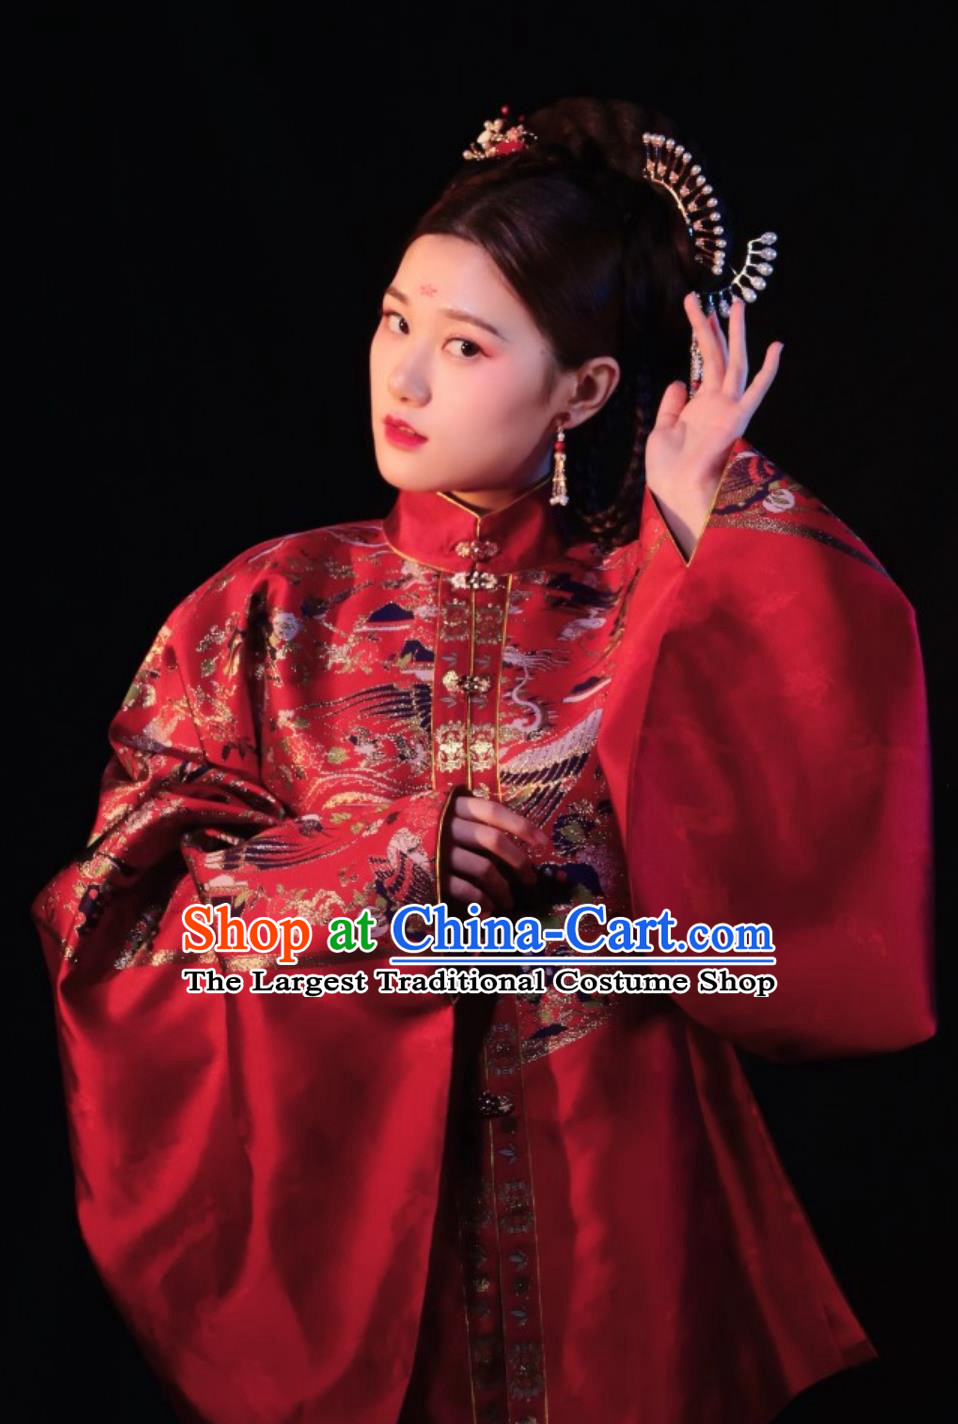 Hanfu Online Shop Traditional Ming Dynasty Woman Garments China Wedding Clothing Ancient Chinese Costumes Red Blouse and Mamian Skirt Complete Set